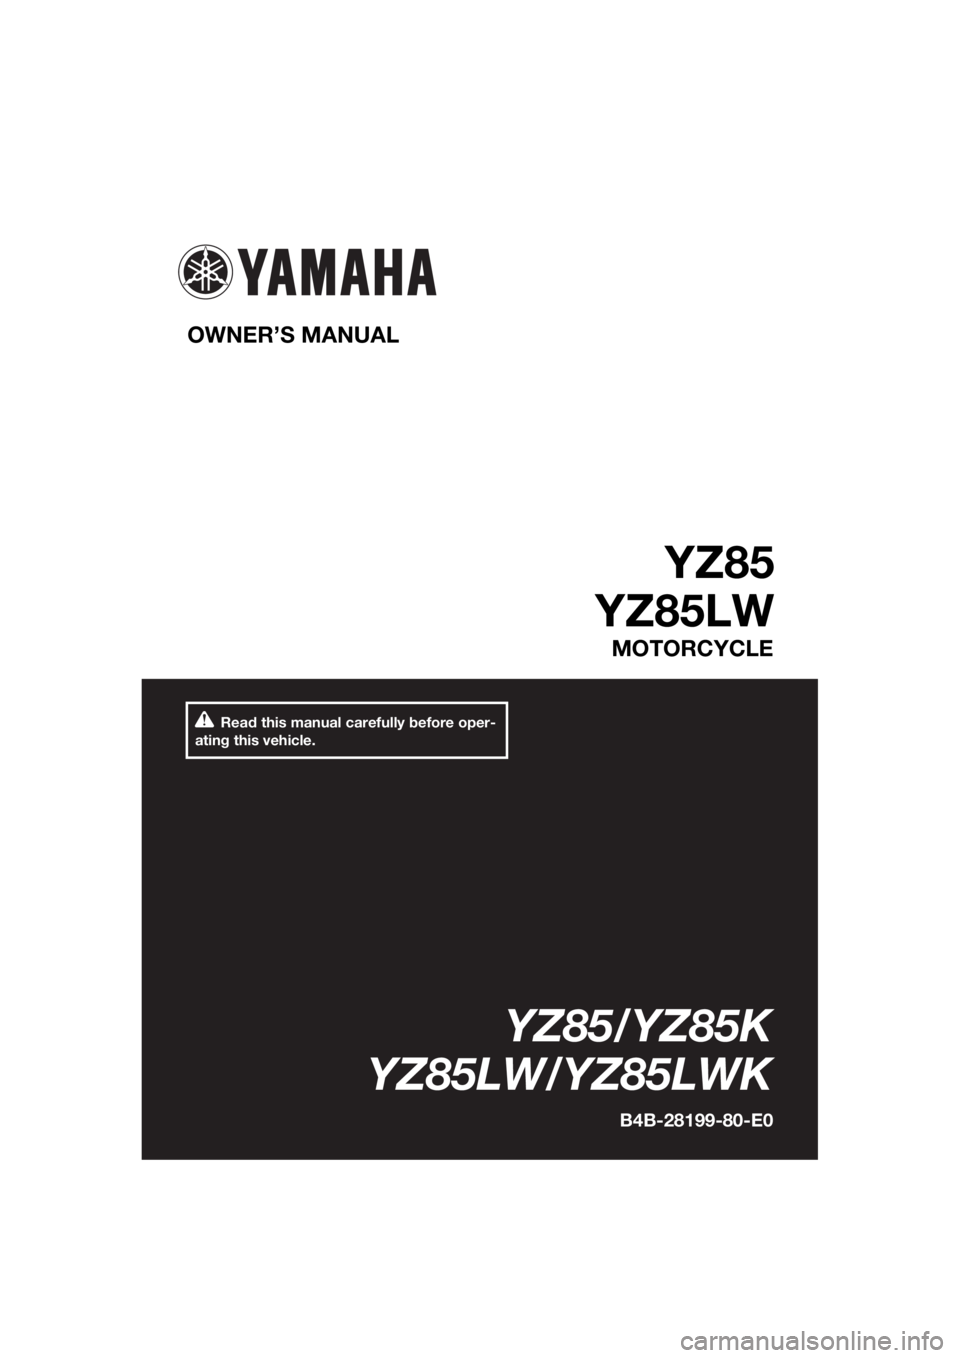 YAMAHA YZ85 2019  Owners Manual Read this manual carefully before oper-
ating this vehicle.
OWNER’S MANUAL 
YZ85
YZ85LW
MOTORCYCLE
YZ85/YZ85K
YZ85LW/YZ85LWK
B4B-28199-80-E0
UB4B80E0.book  Page 1  Tuesday, March 27, 2018  1:39 PM 